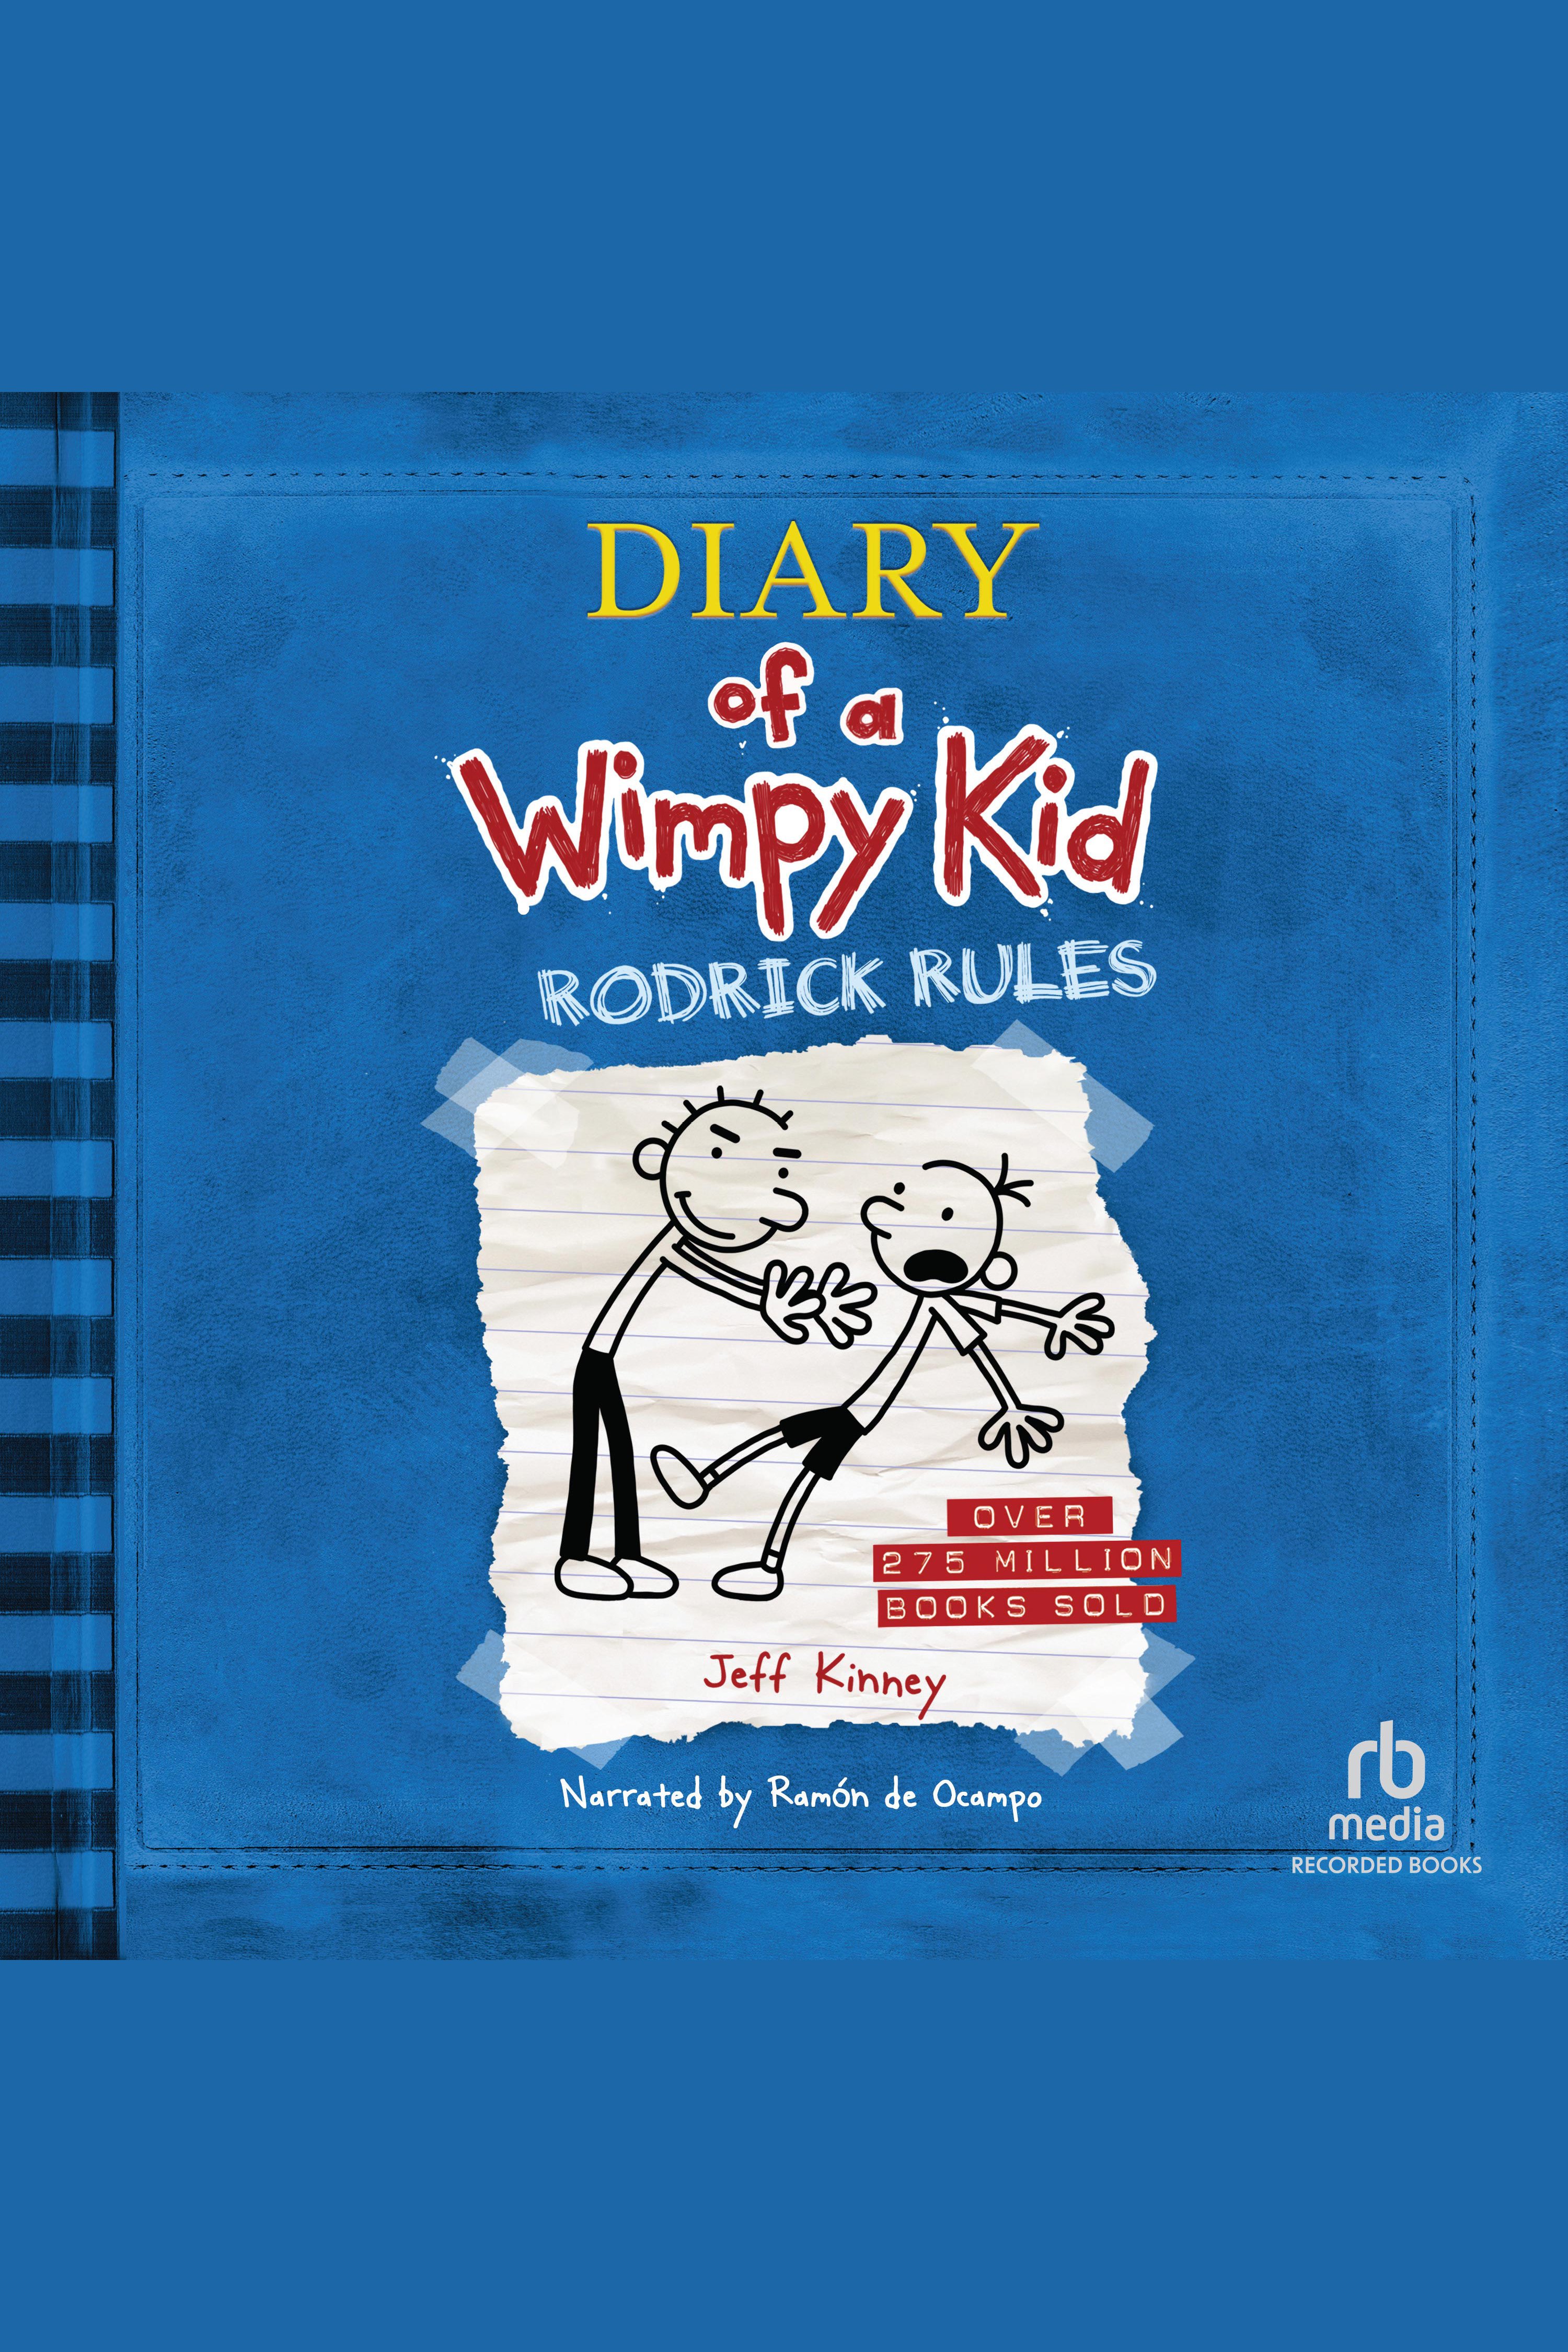 Rodrick Rules: Diary of a Wimpy Kid cover image